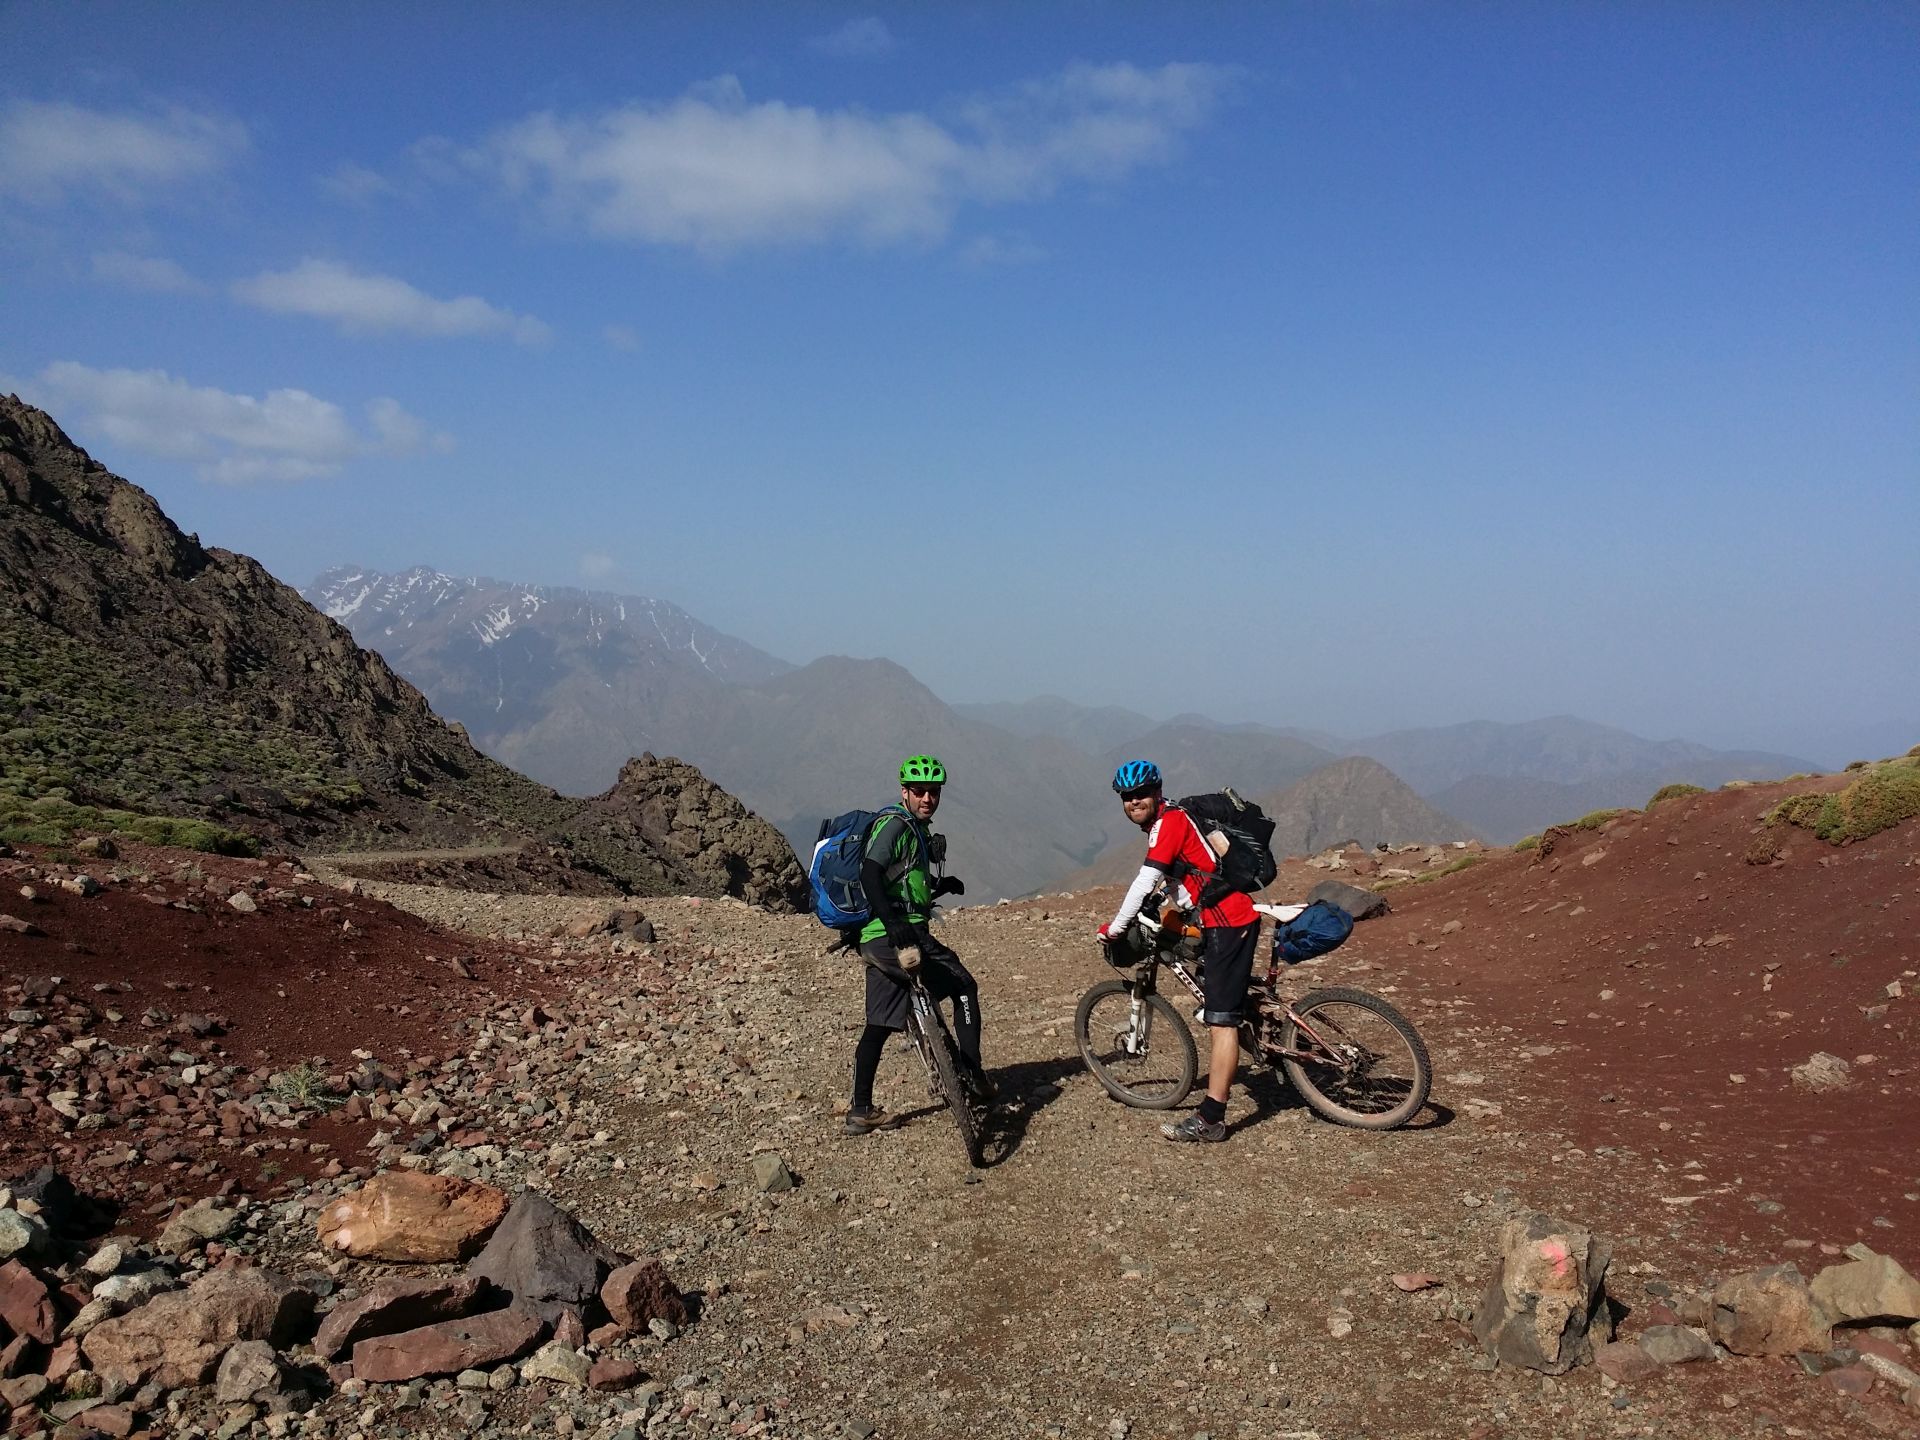 Day 8 - Whizz-kid Shaun & Trails-ace Steve readying for the rock-tastic descent from Tizi-n-Eddi to the village of Tizi-n-Tacheddirt. Jbel Aksoual (12,828 ft) is the highest peak on the horizon, on the left.